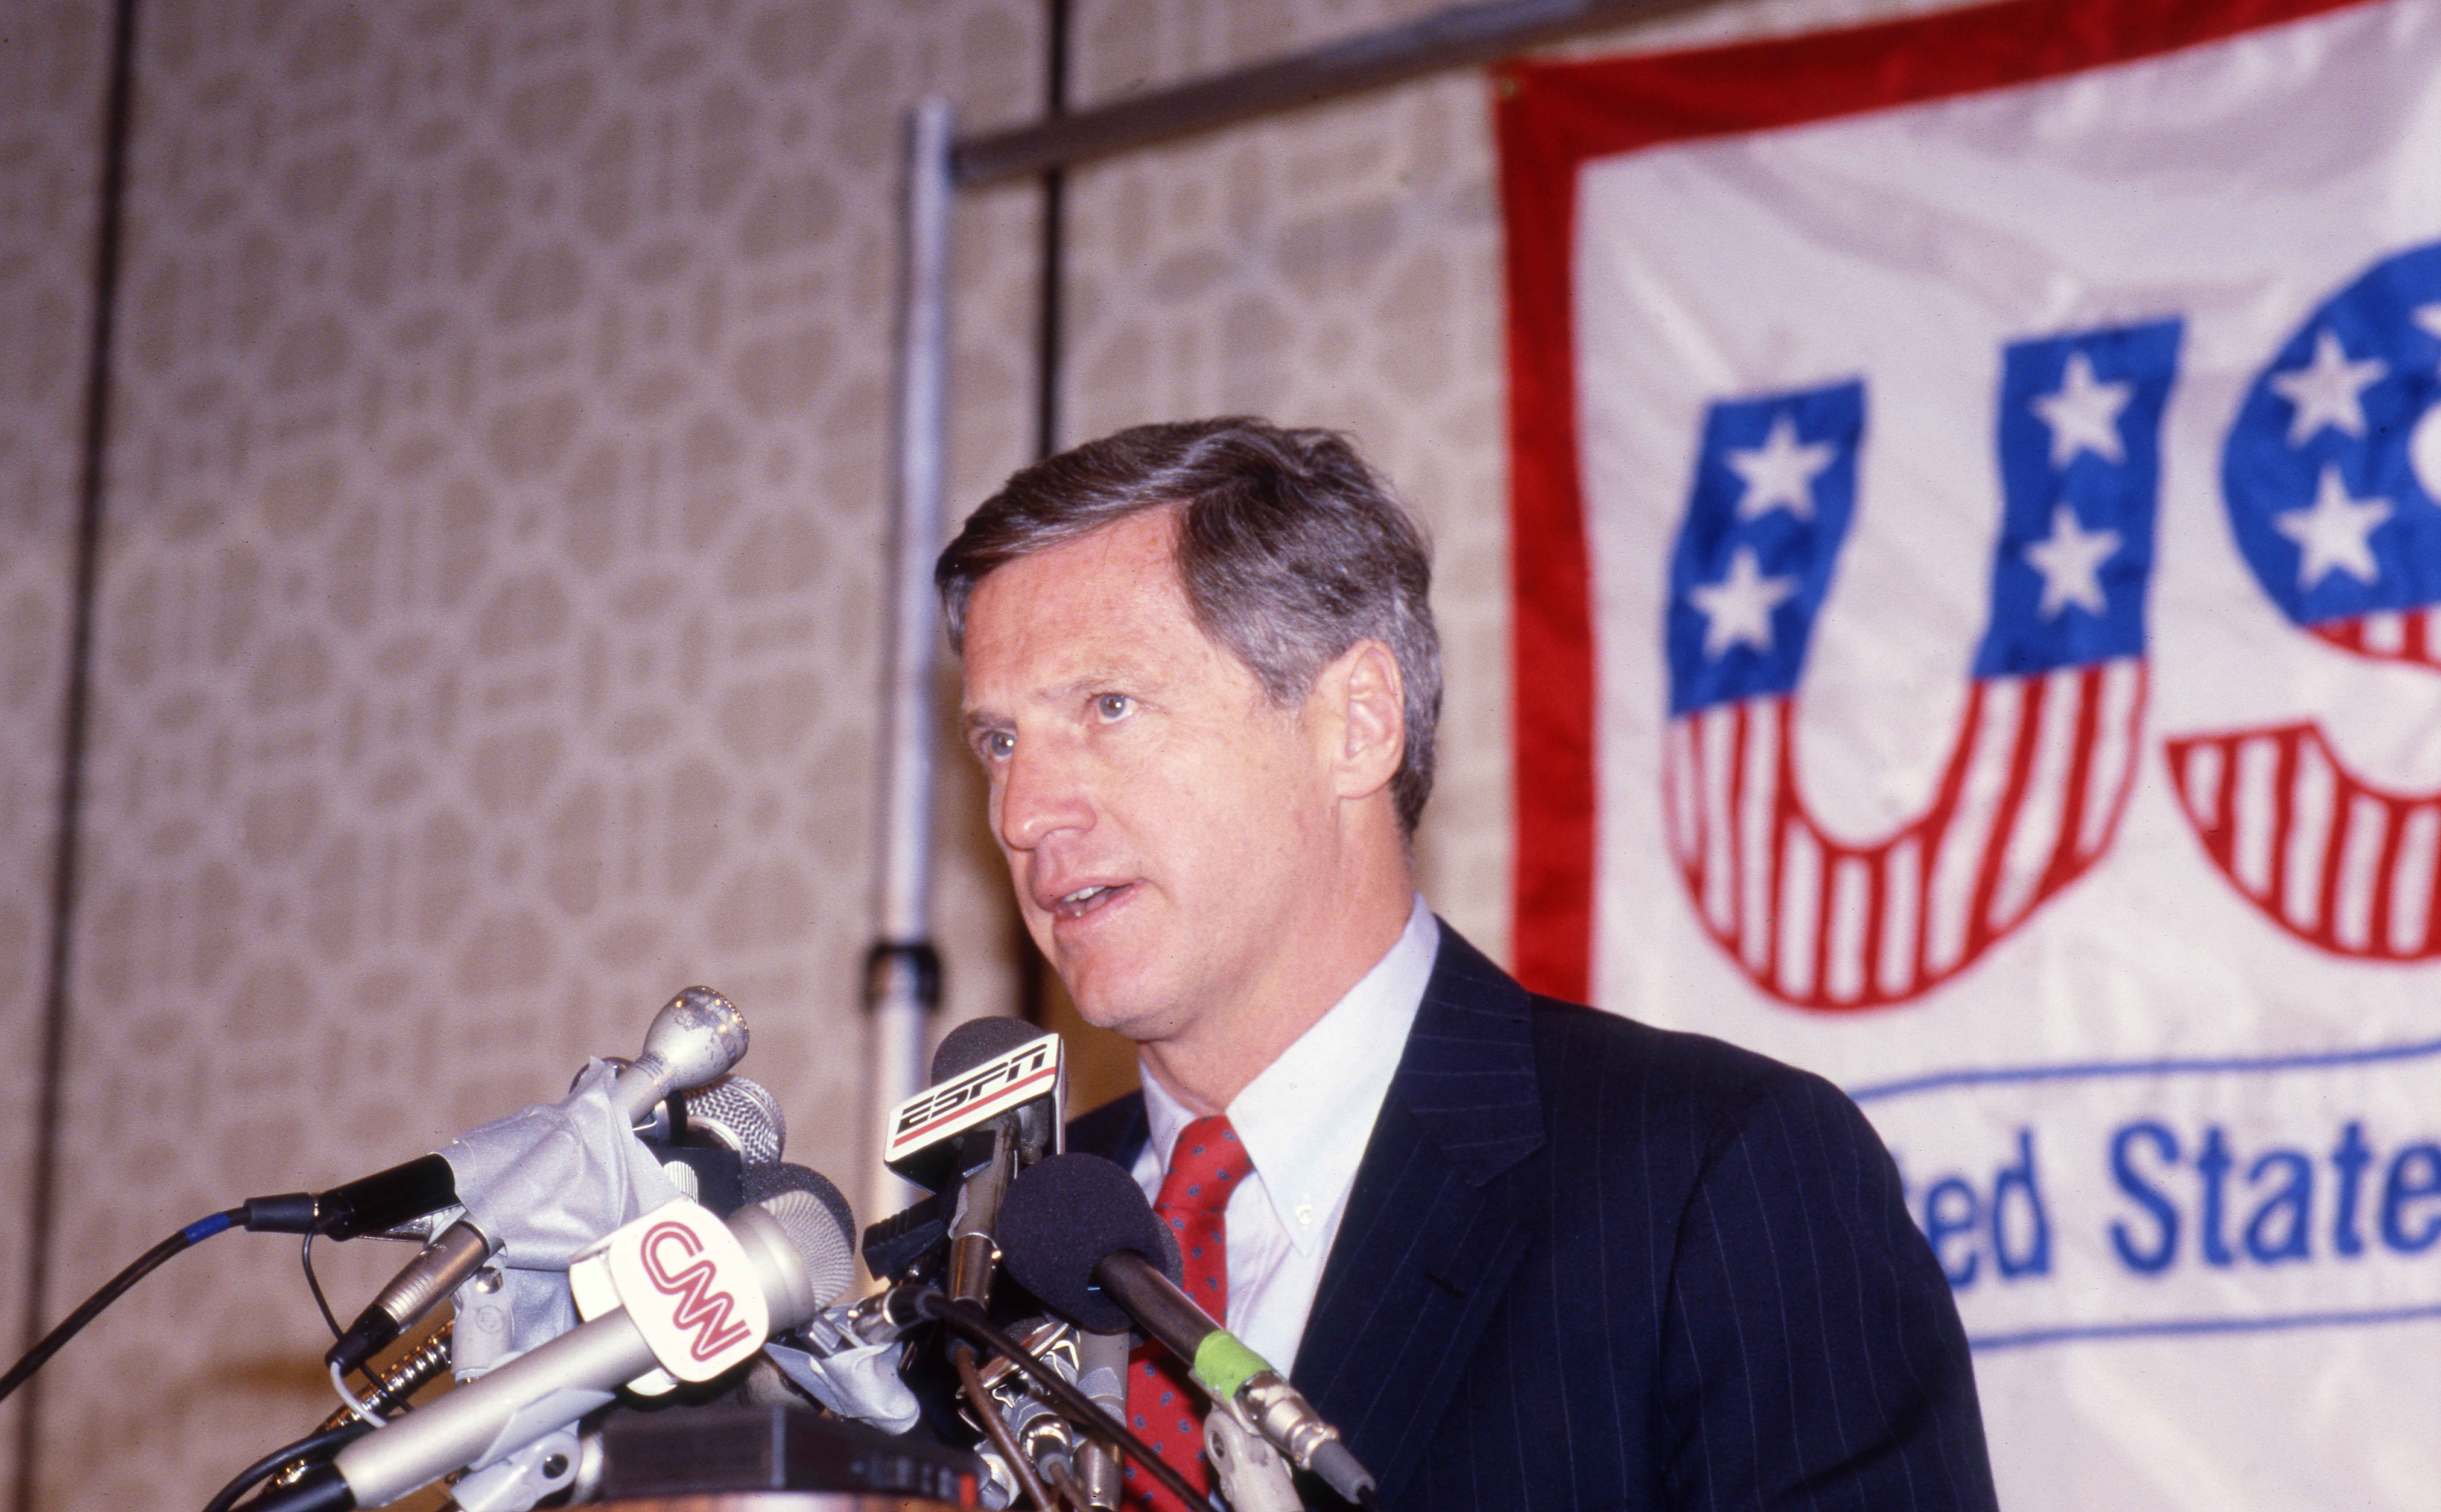 April 29, 1985; Teaneck, NJ, USA; USFL commissioner Harry L. Usher, along with other USFL football executives, speaks at a press conference at the Loews Glenpointe Hotel in Teaneck, N.J. about whether the league will move the start of its season to the fall. Mandatory Credit: Carmine Galasso-USA TODAY NETWORK